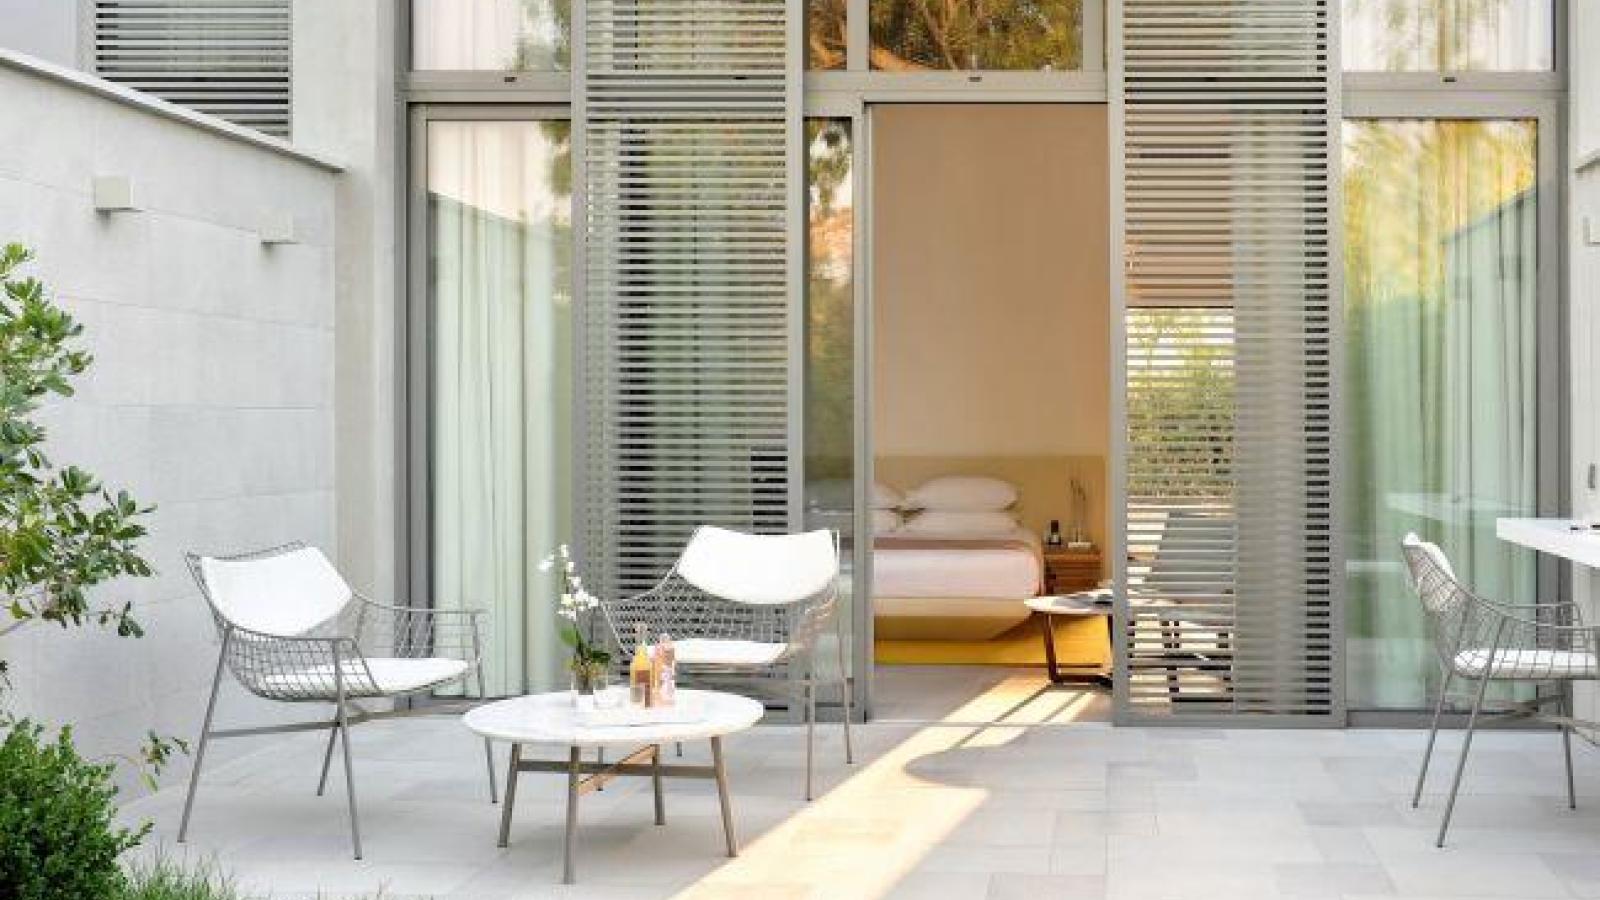 Design Hotel Saint Tropez offers supreme elegance and style